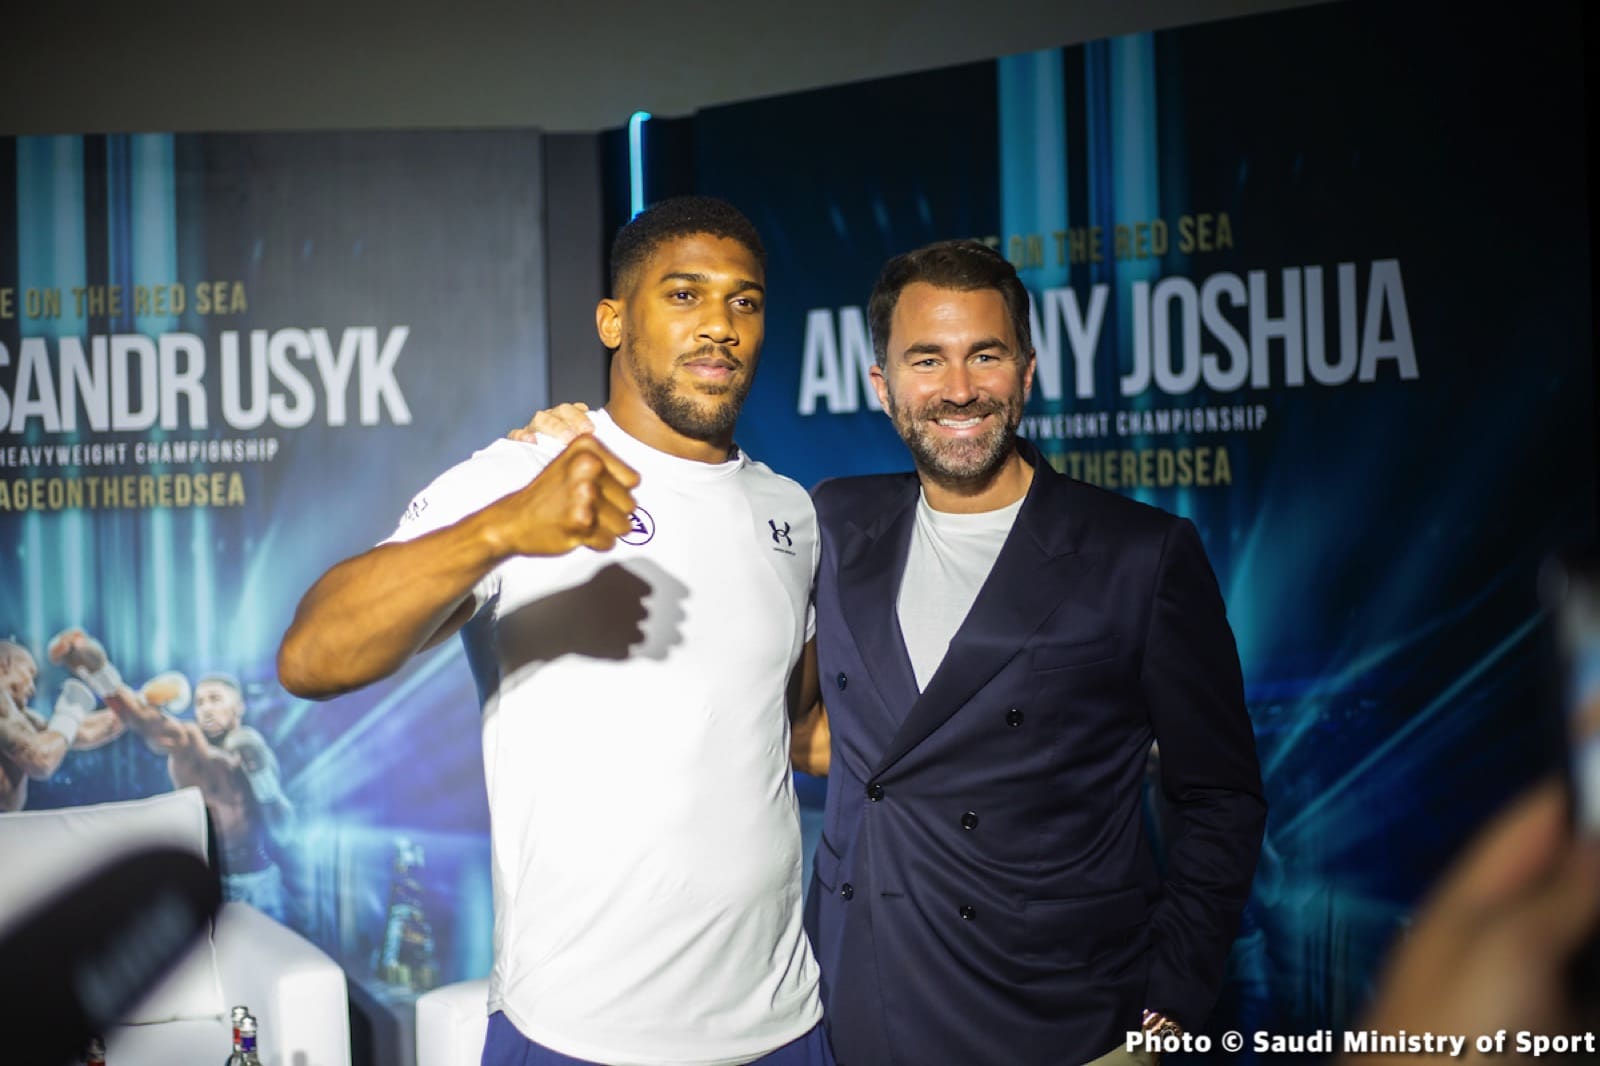 Win Or Lose On August 20th, Joshua Will Fight Again In December Says Hearn